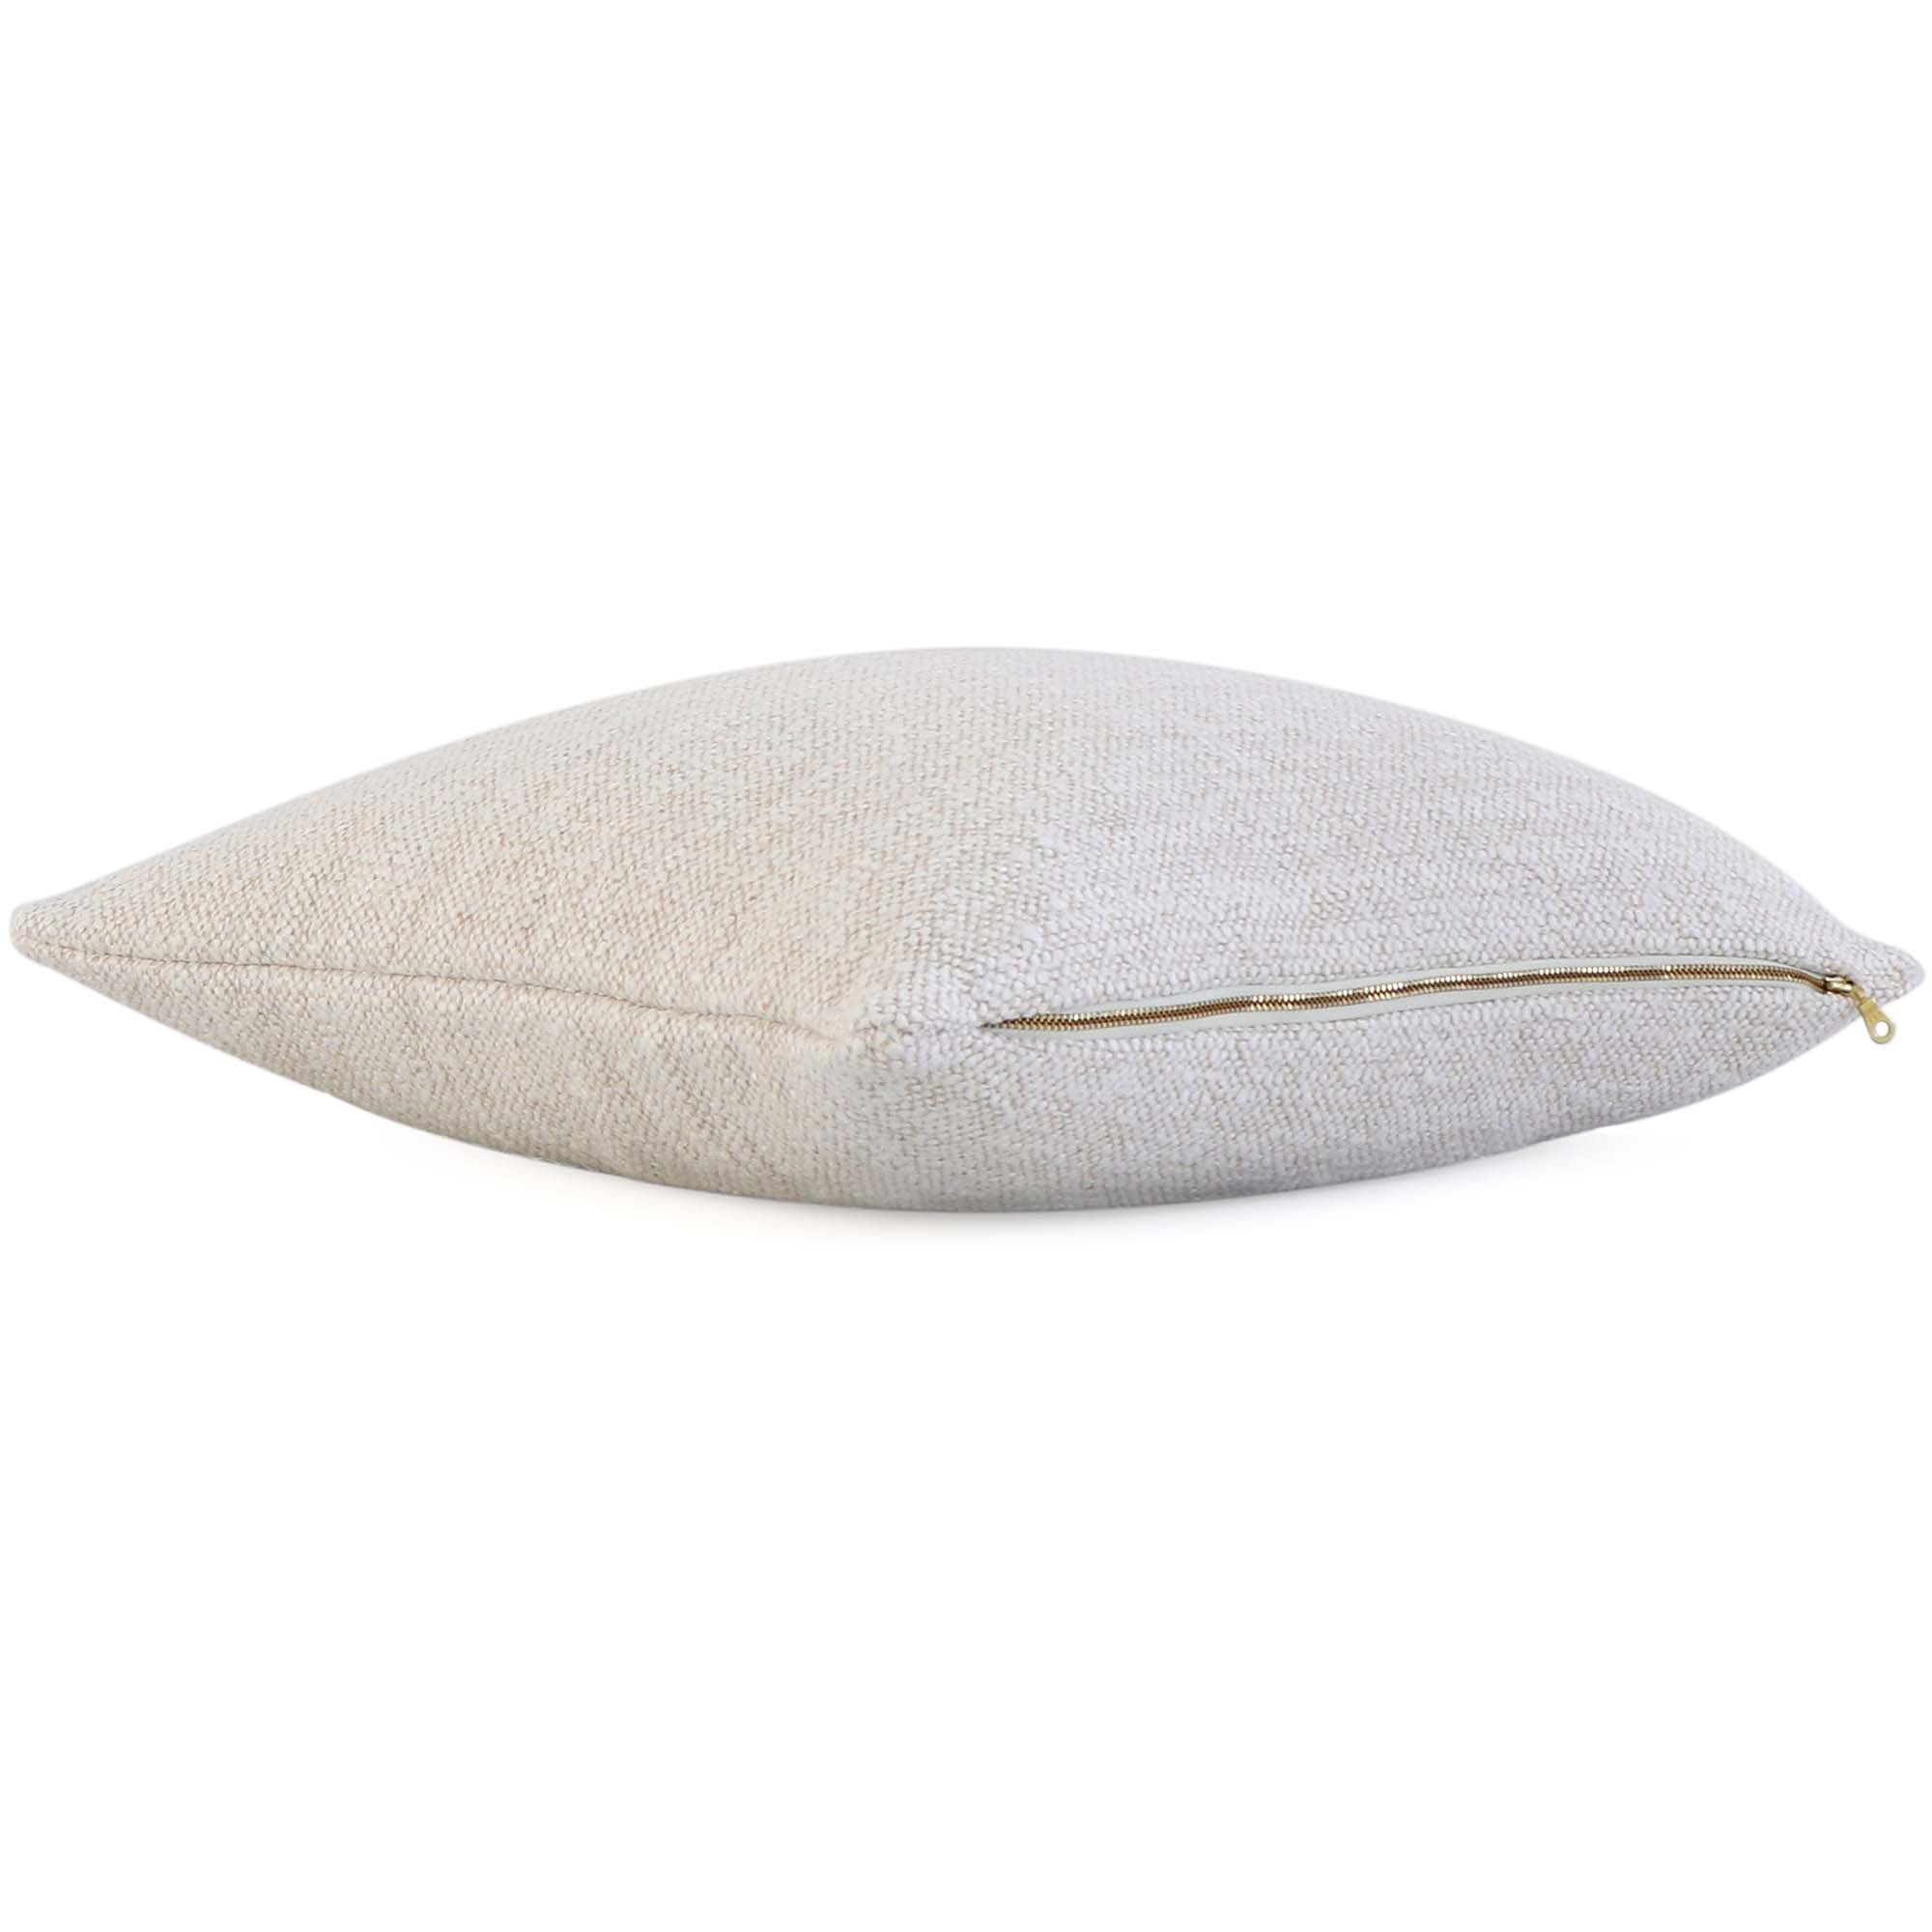 Thibaut Sasso Parchment Textured Soft Decorative Throw Pillow Cover with Exposed Brass YKK Zipper